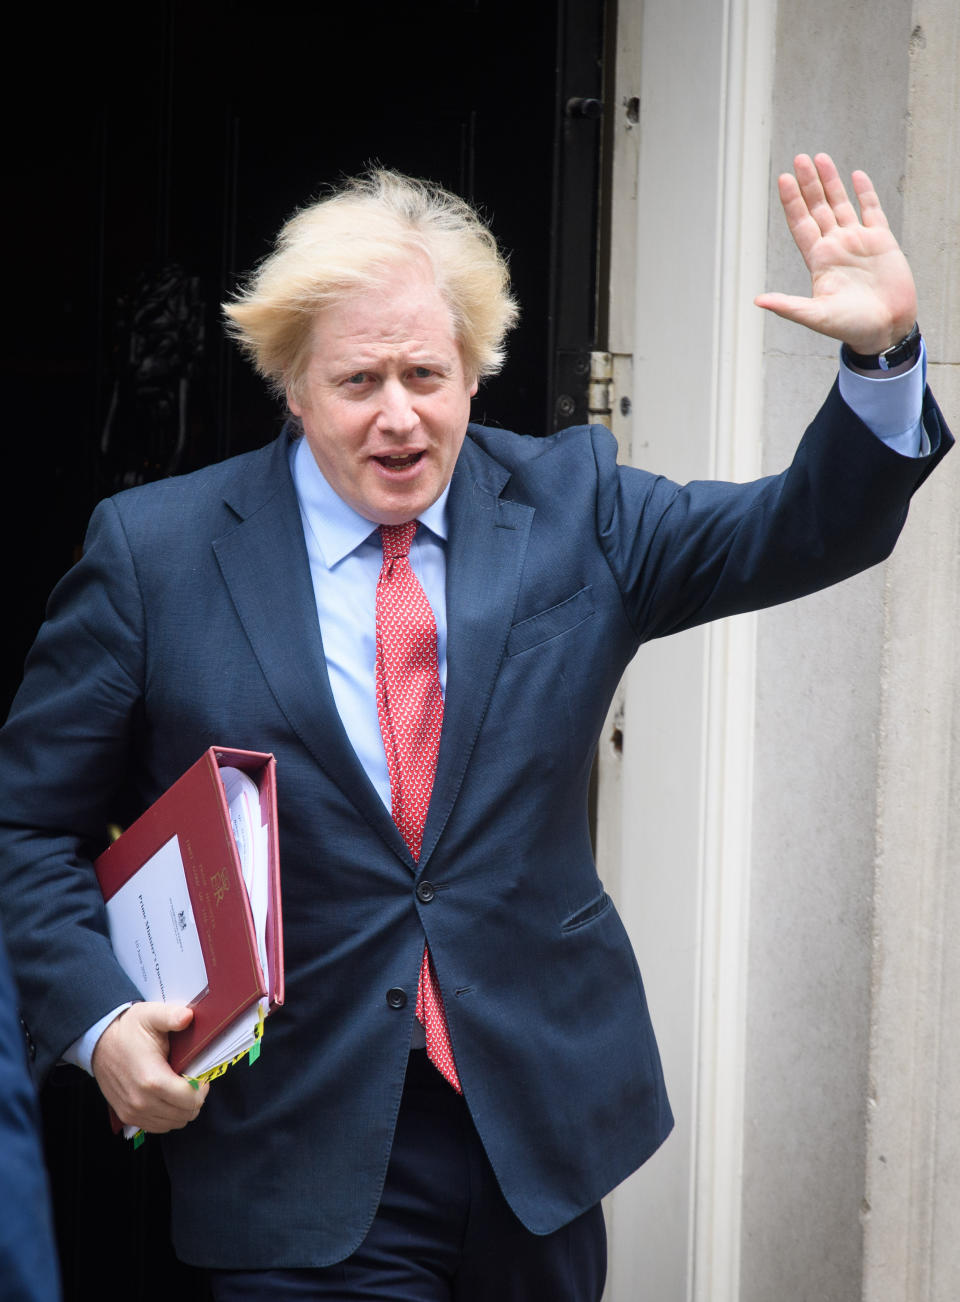 Prime Minister Boris Johnson departs 10 Downing Street, in Westminster, London, to attend Prime Minister's Questions (PMQs) at the Houses of Parliament. Picture date: Wednesday June 10, 2020. Photo credit should read: Matt Crossick/Empics